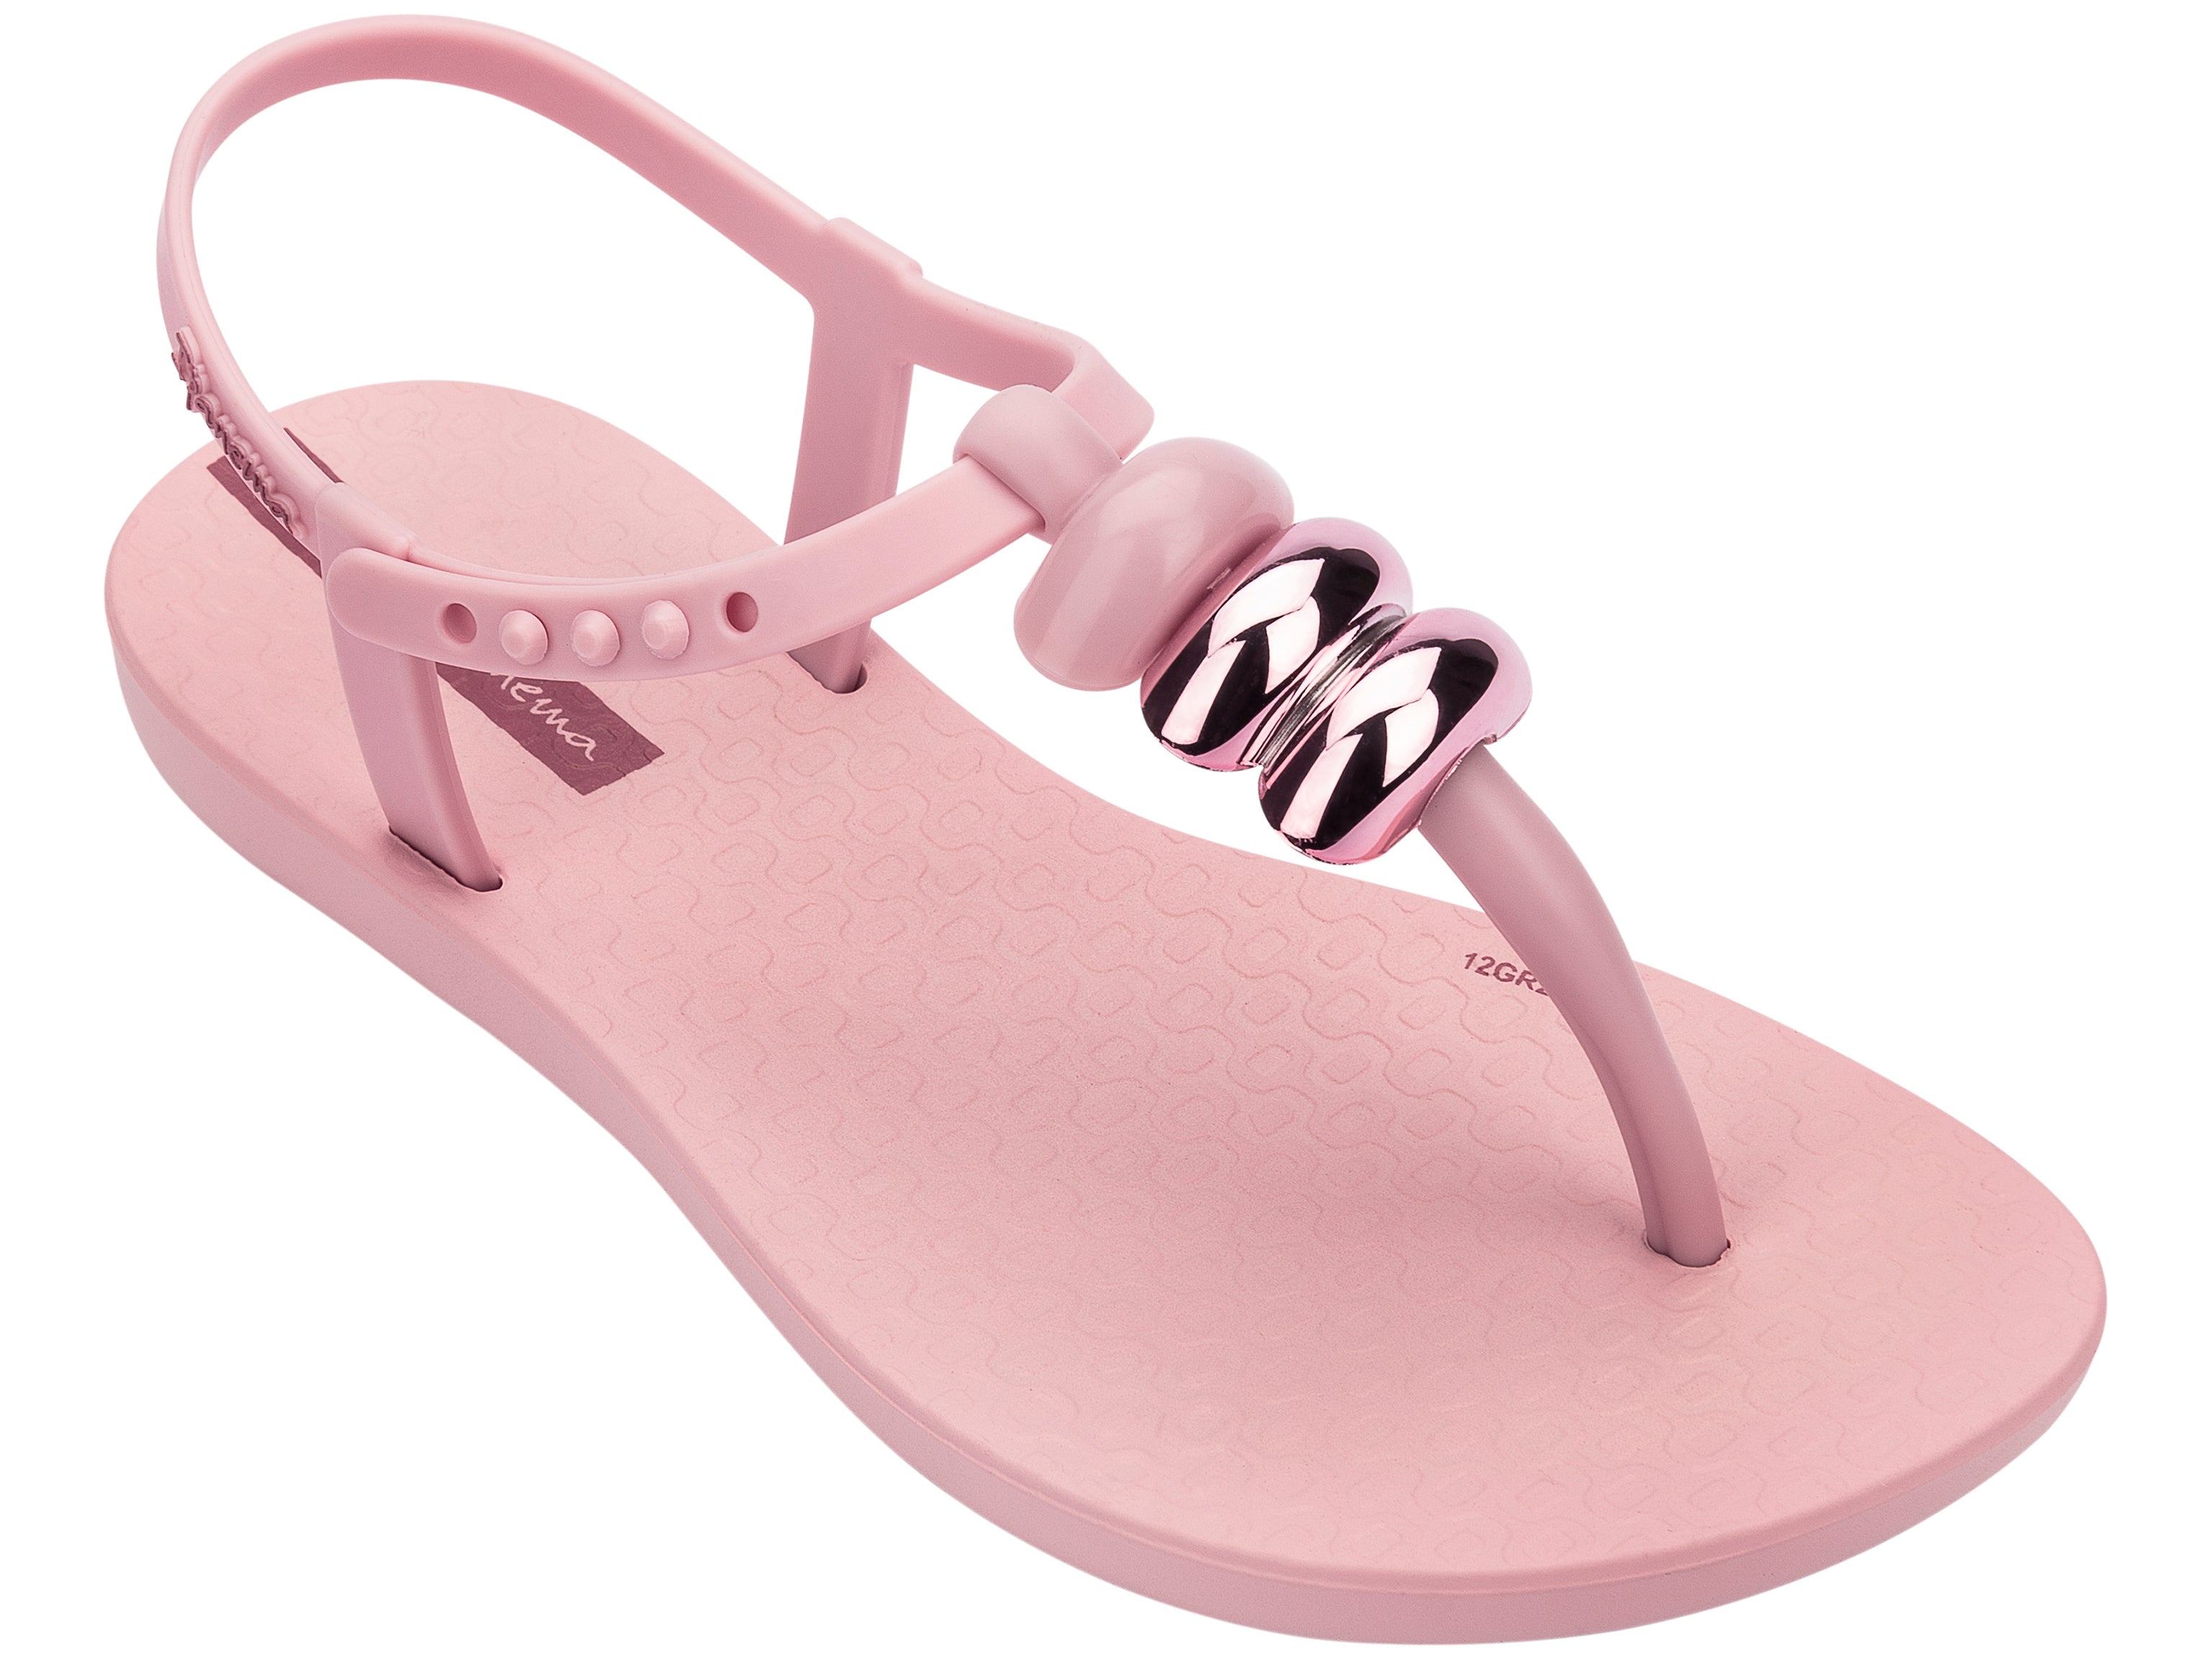 Angled view of a light pink Ipanema Class kids' t-strap sandal with 3 baubles on the strap.